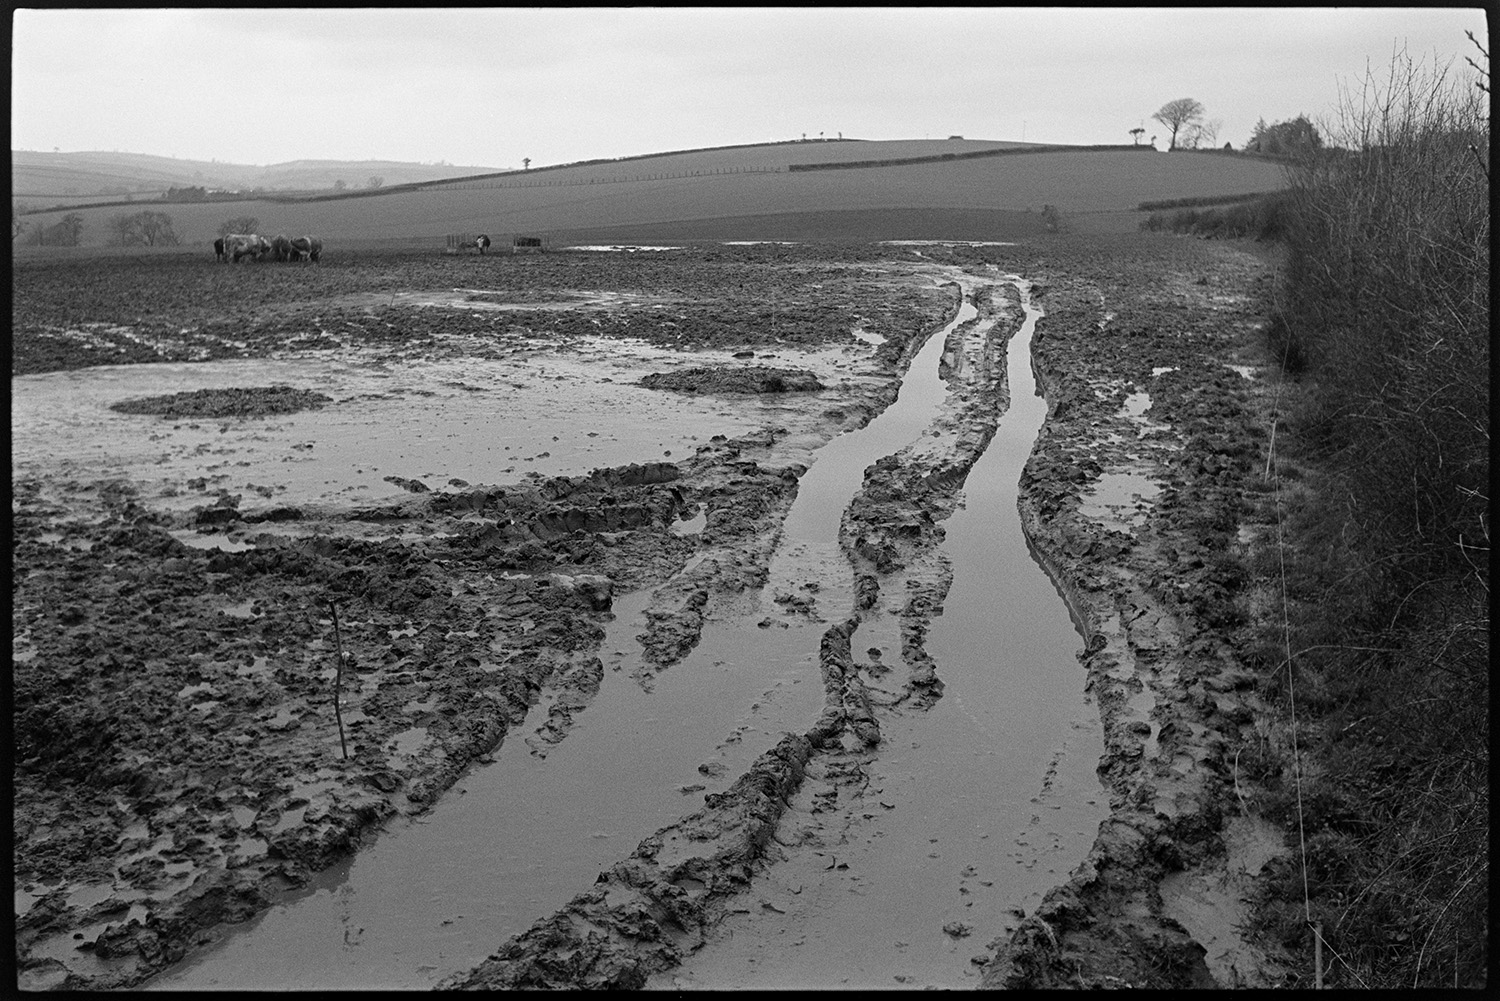 Very muddy field. 
[Tracks filled with water in a muddy field at Ashreigney. Cows are gathered around hay racks in the field and trees and hedgerows can be seen in the distance.]